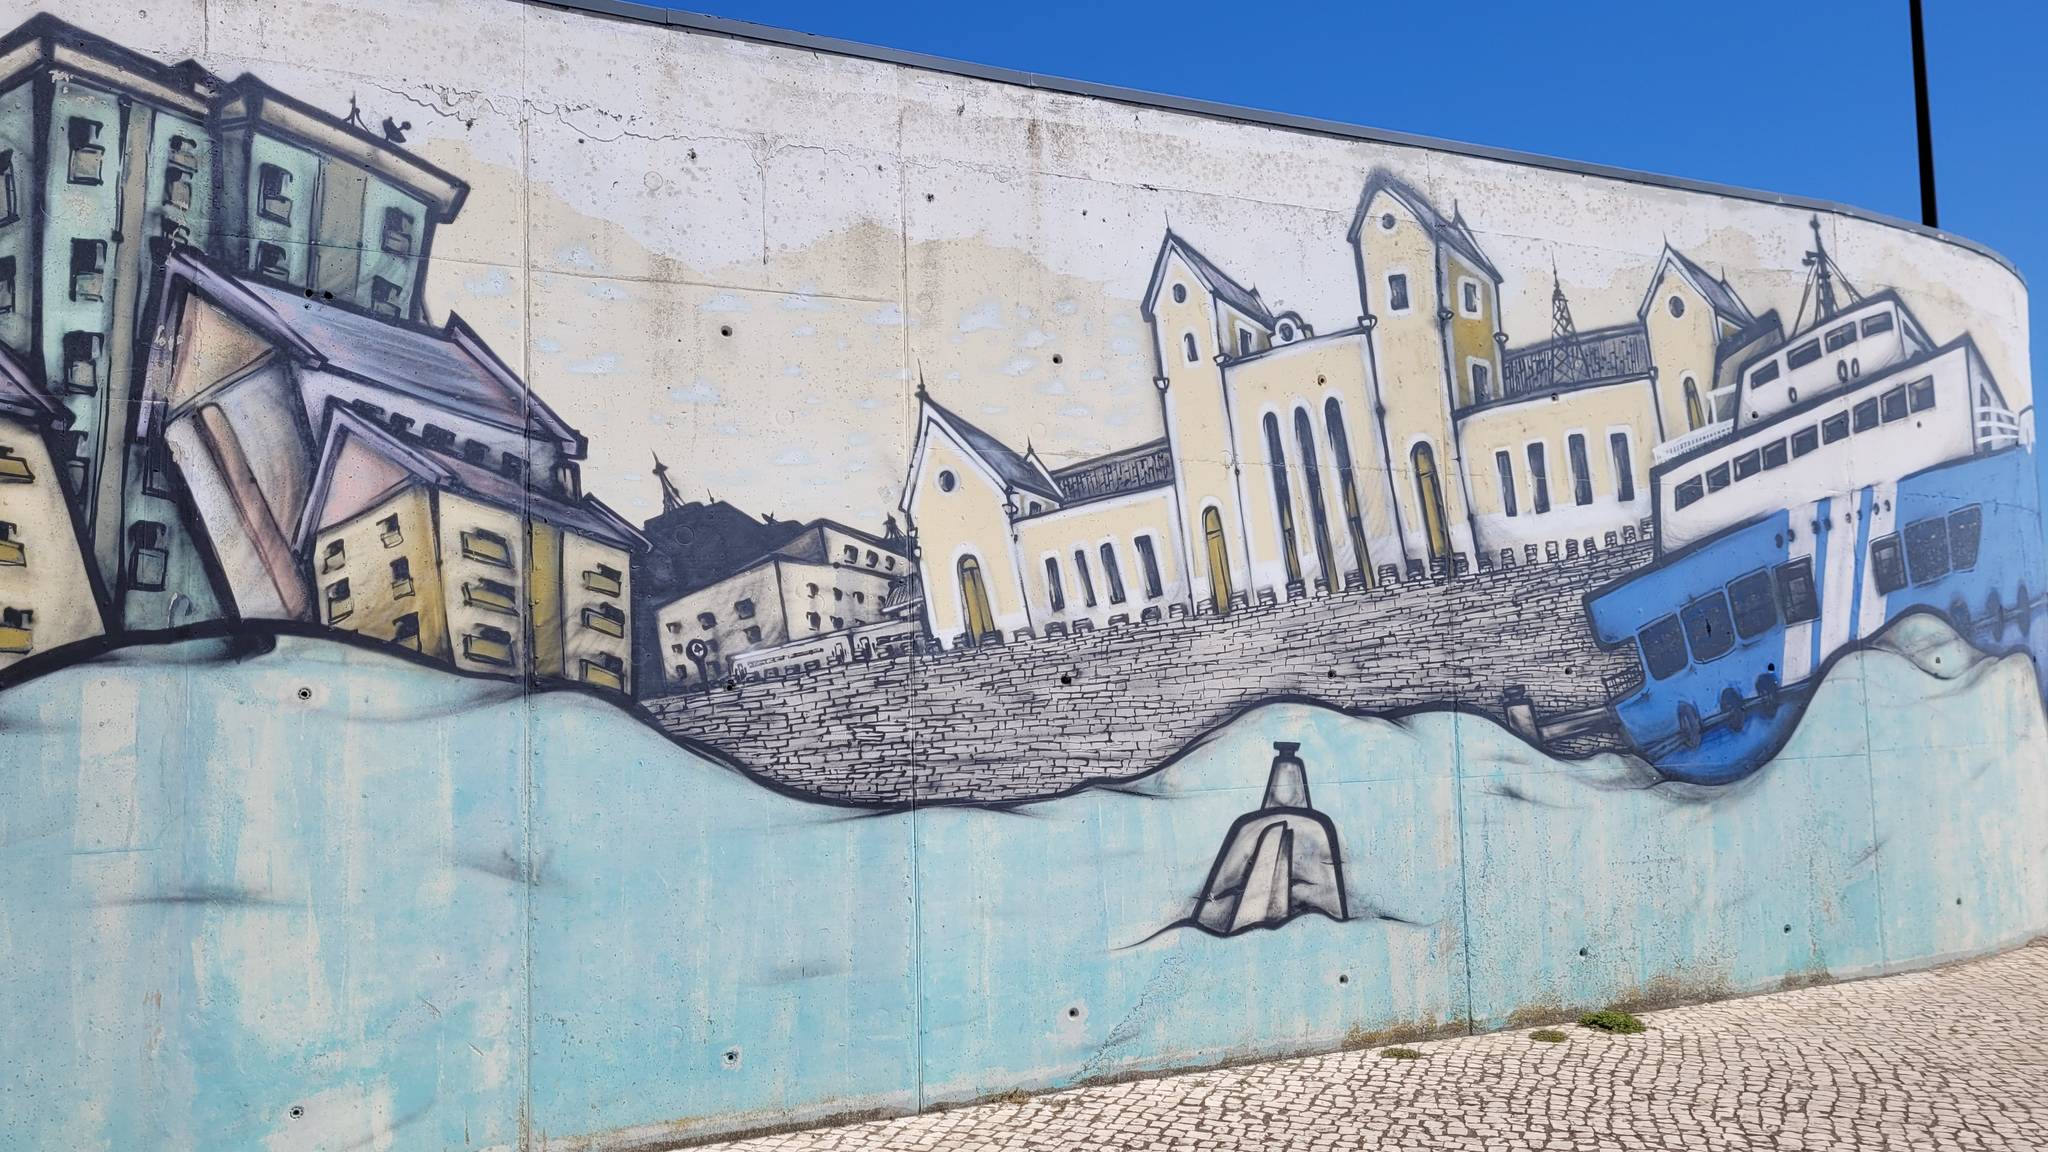 Pluzbrut&mdash;Tribute to the people of Barreiro